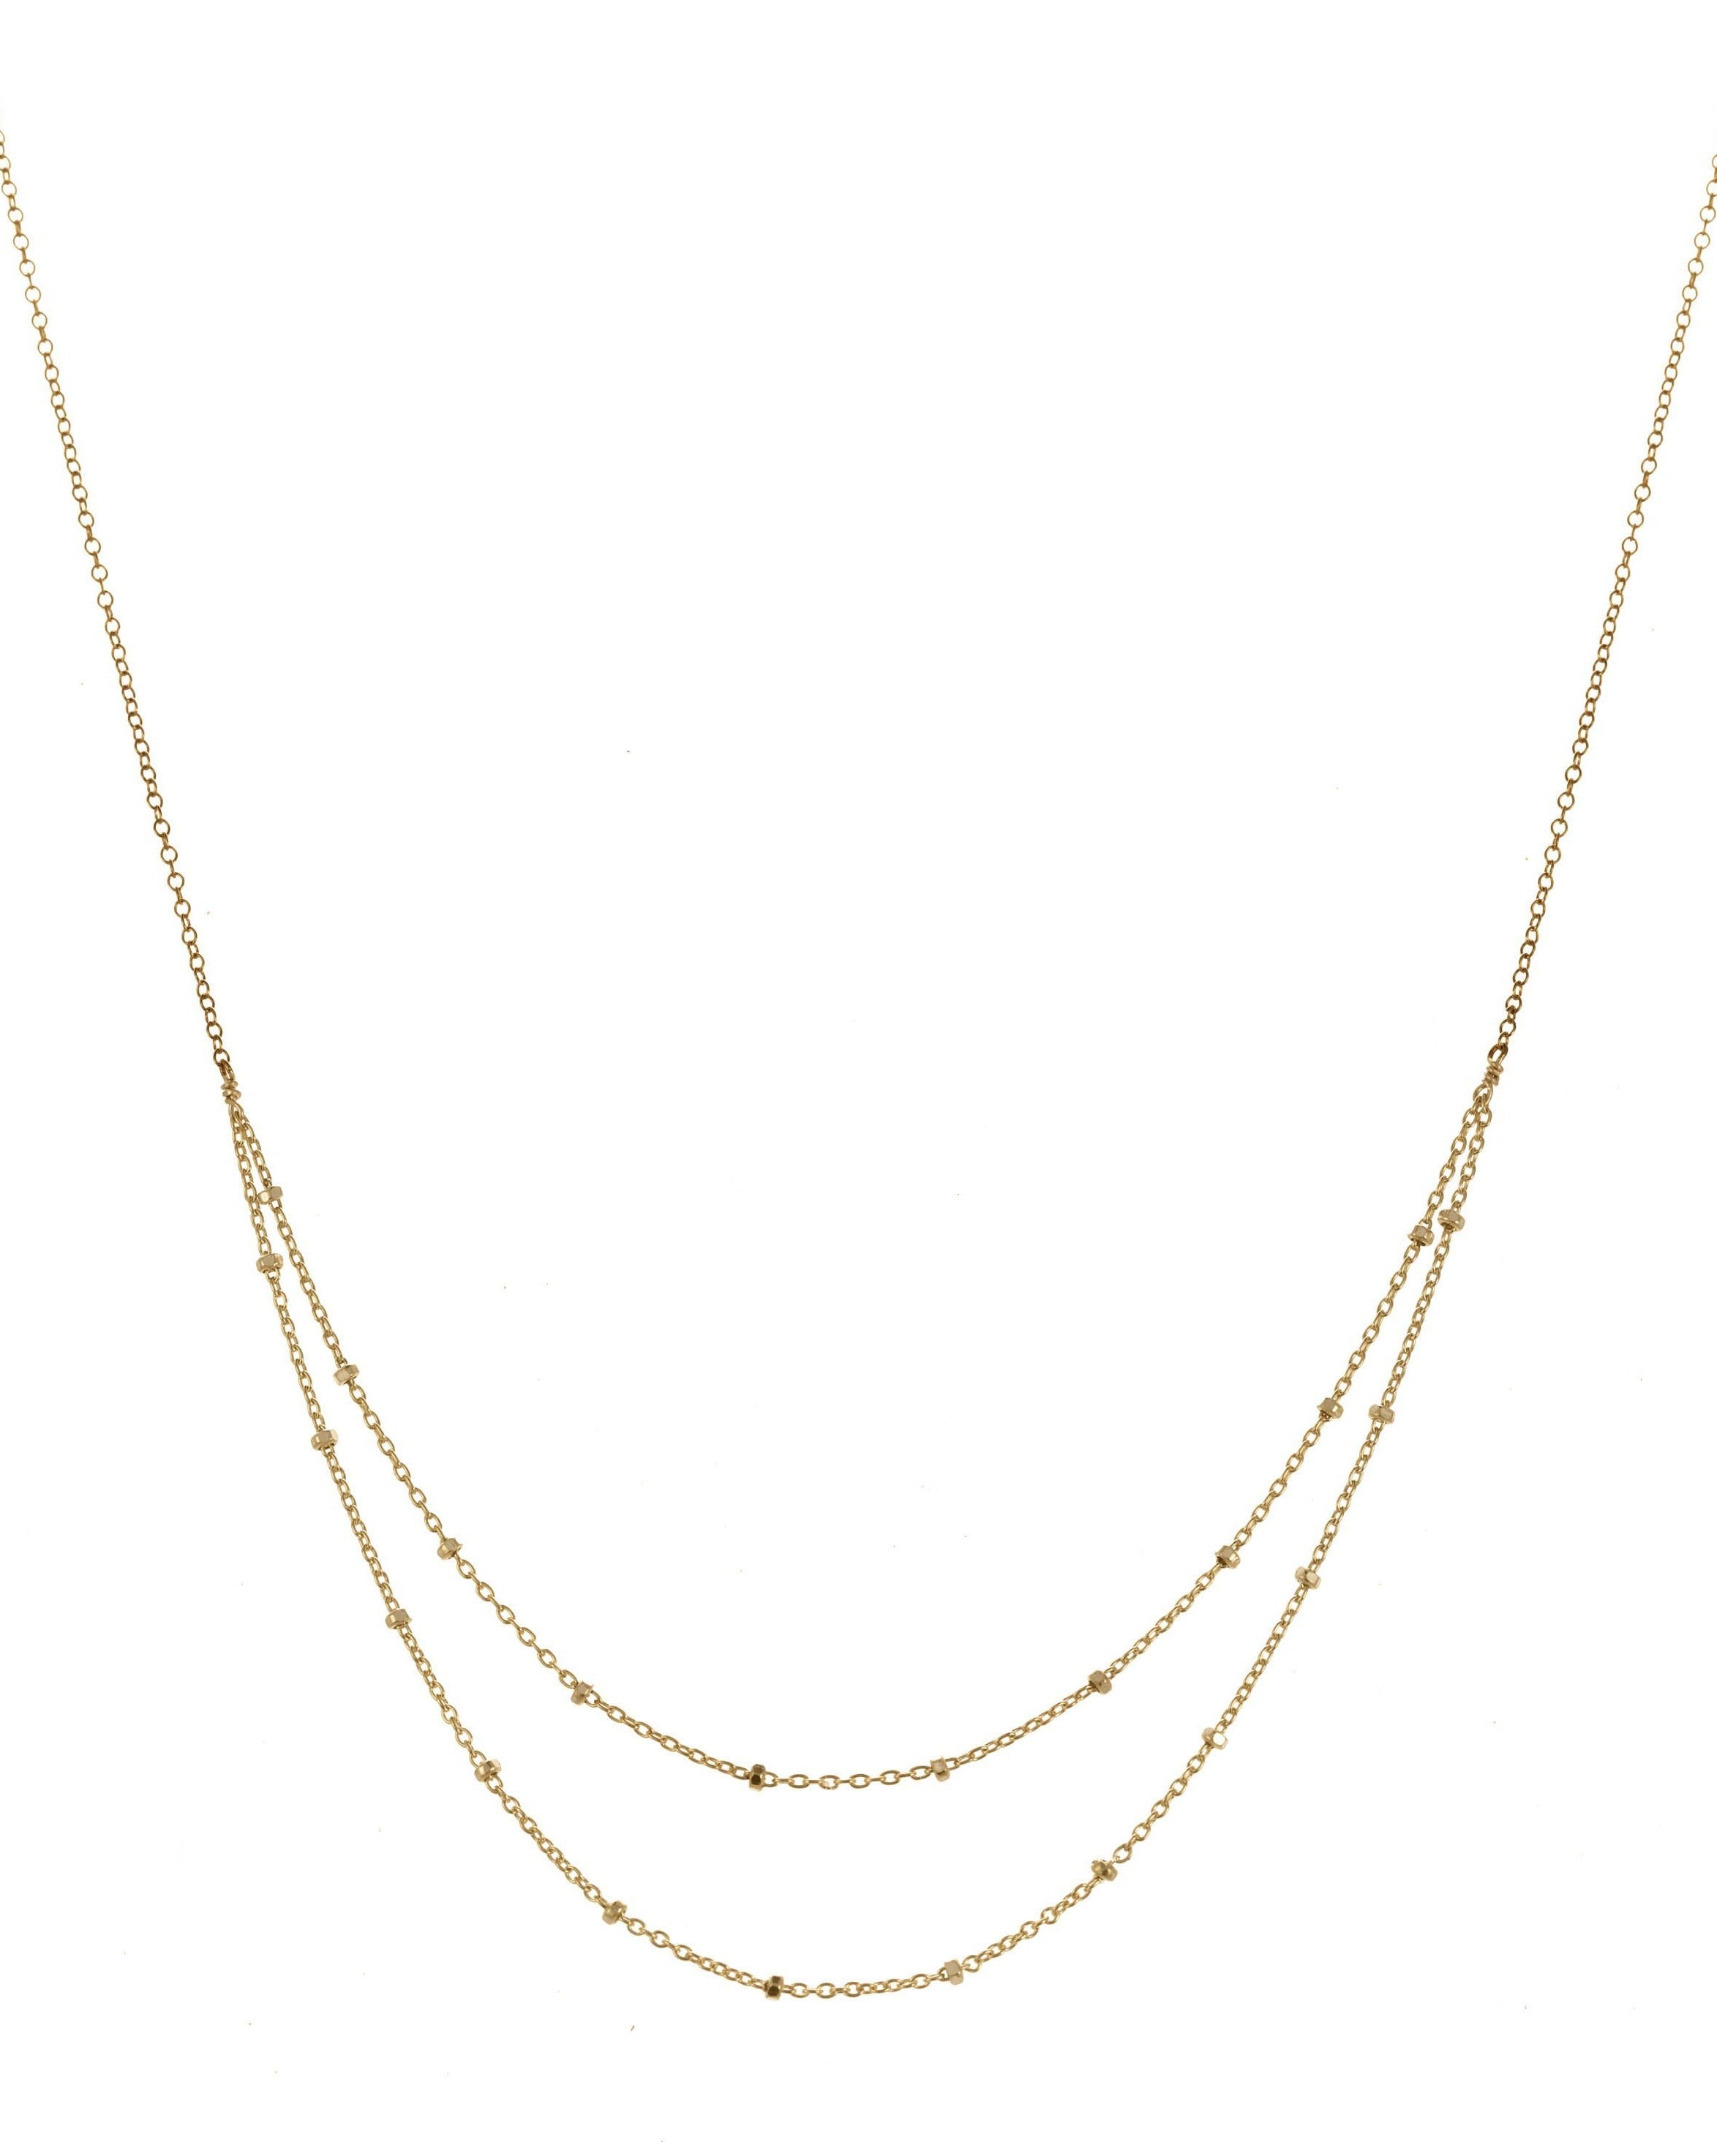 Dolmas Necklace by KOZAKH. A 16 to 18 inch adjustable length double chain style necklace in 14K Gold Filled, featuring sterling silver balls.